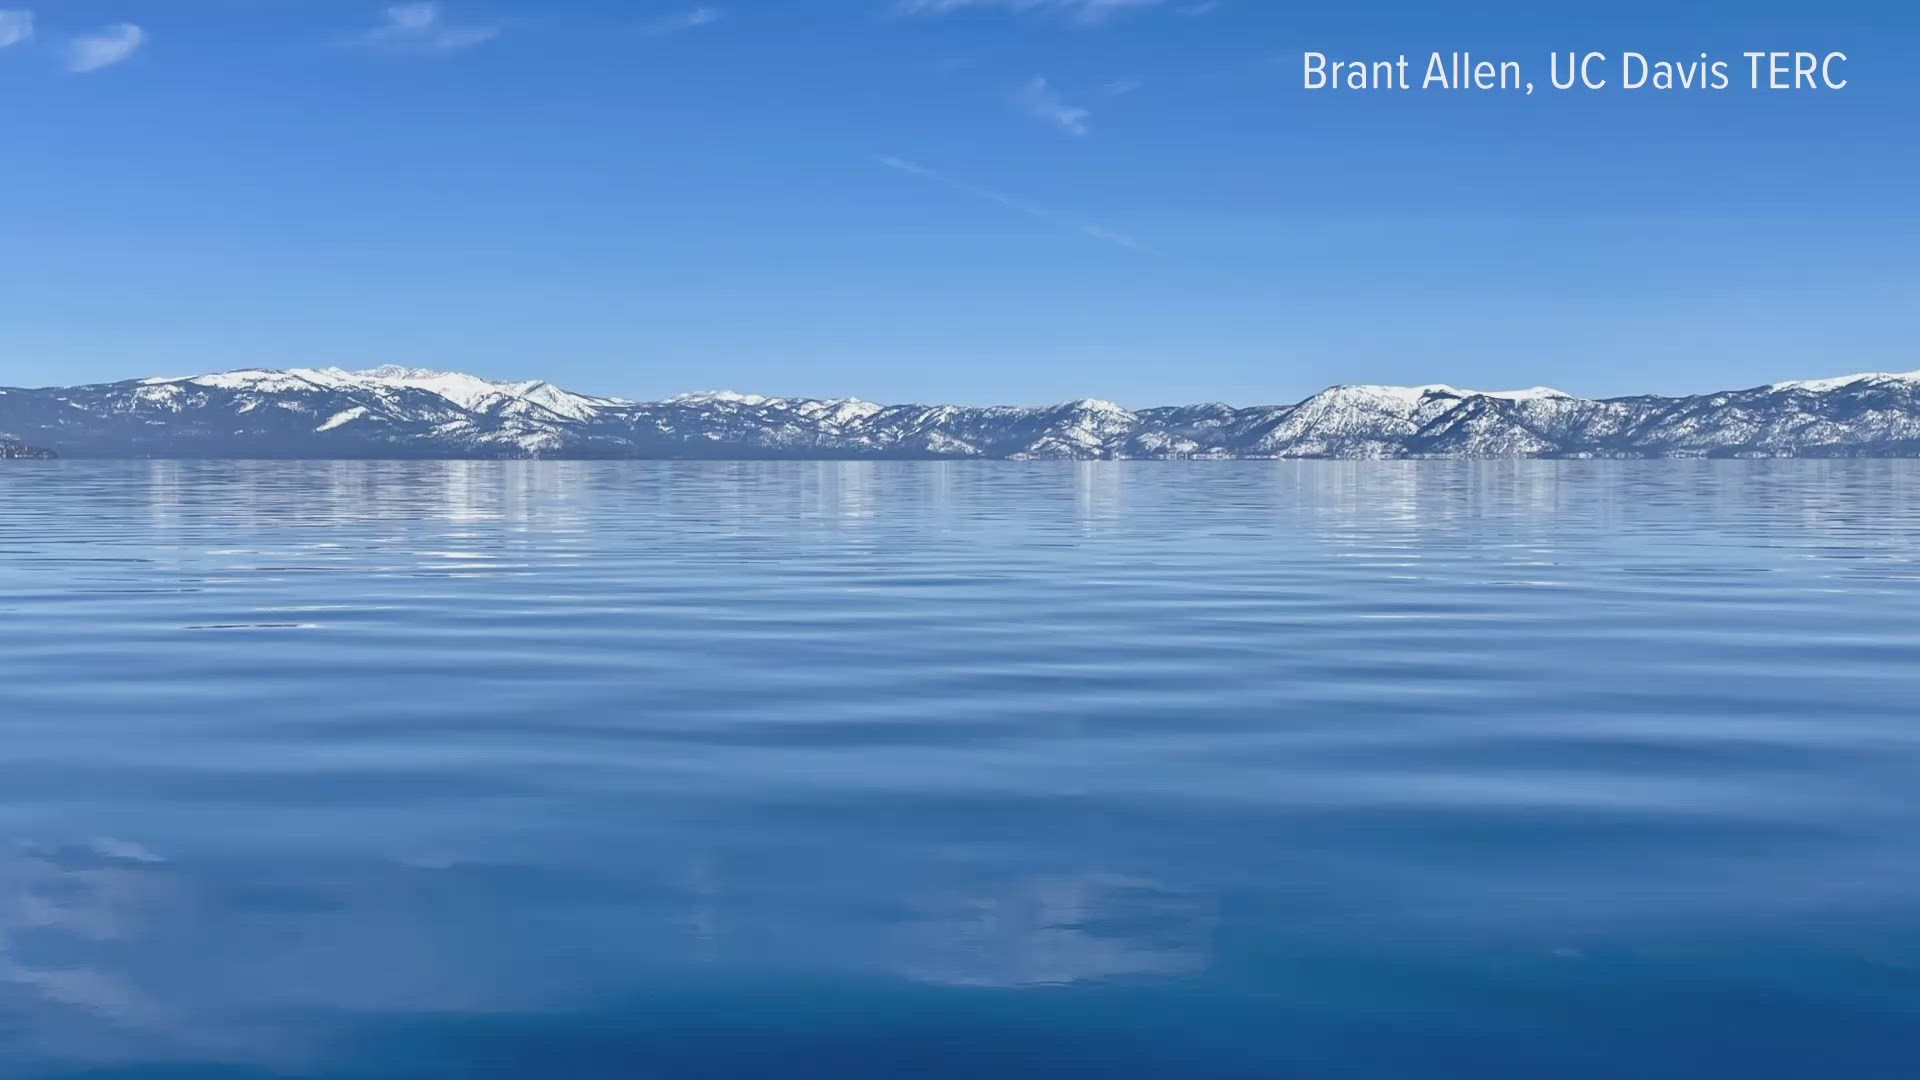 Experts: Lake Tahoe's clear, blue water caused by zooplankton